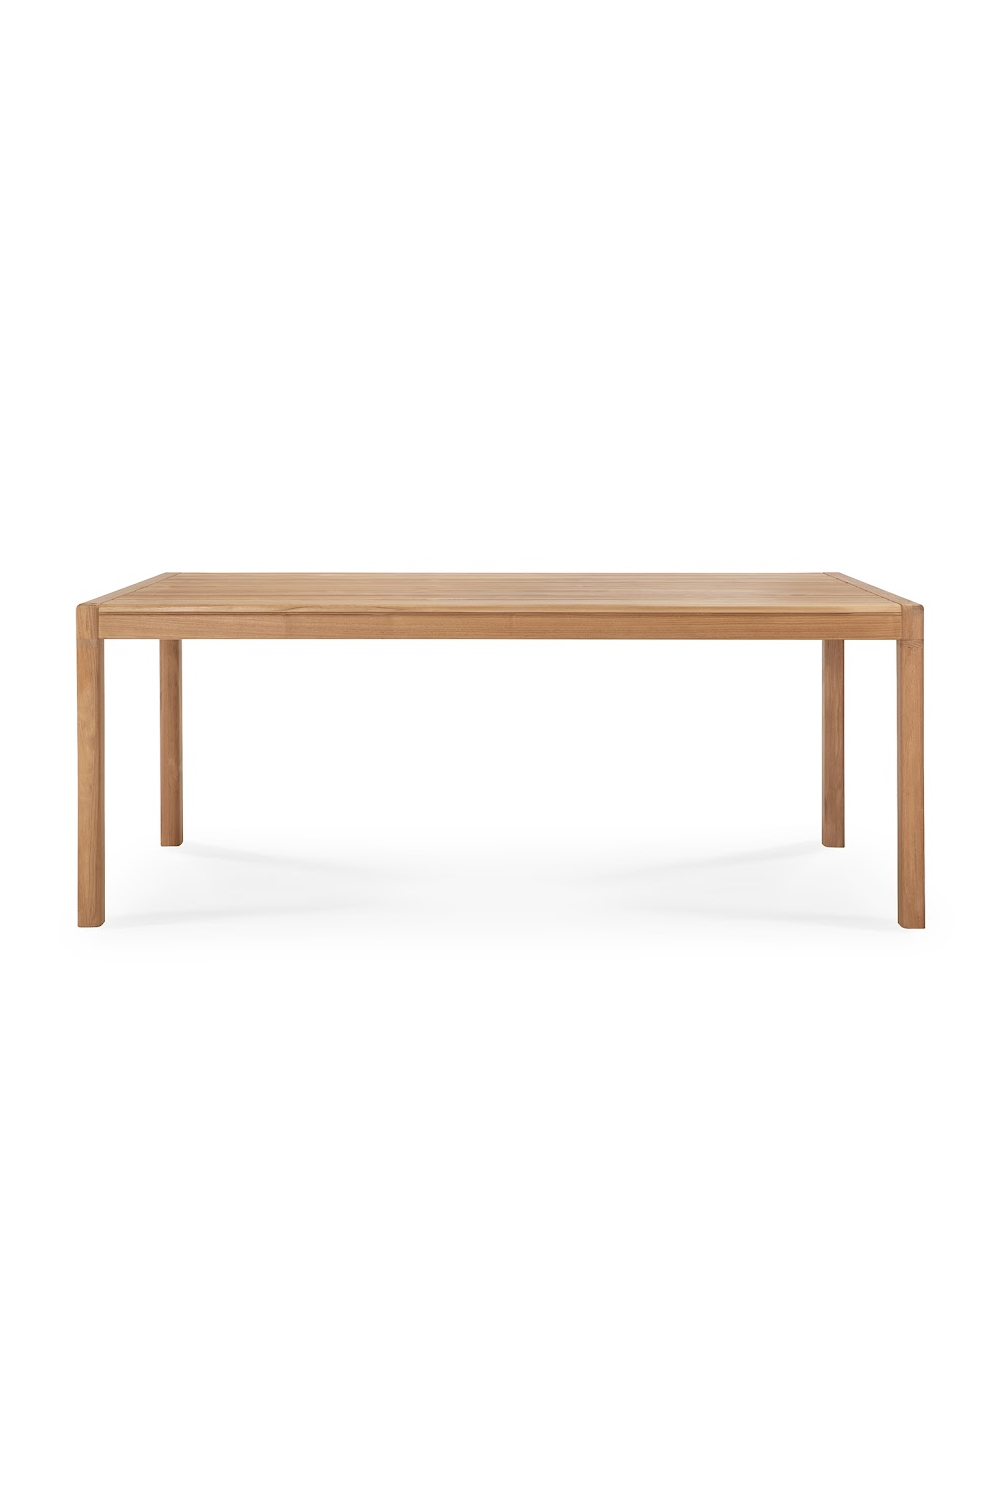 Solid Teak Outdoor Dining Table | Ethnicraft Jack | Oroa.com